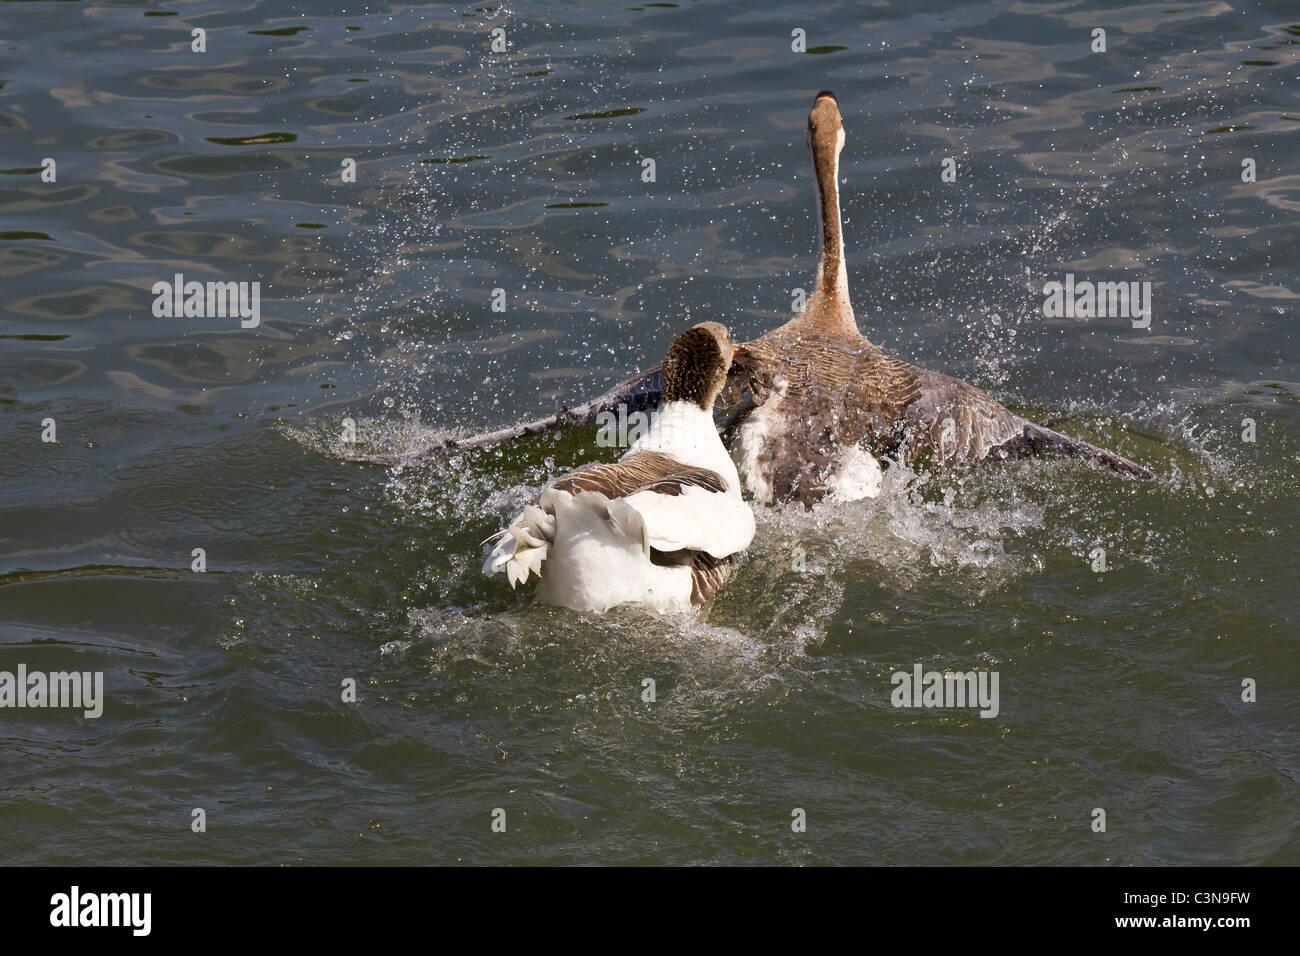 A goose was attacking a duck when another goose; different species, came to its defense and chased the offender away. Stock Photo